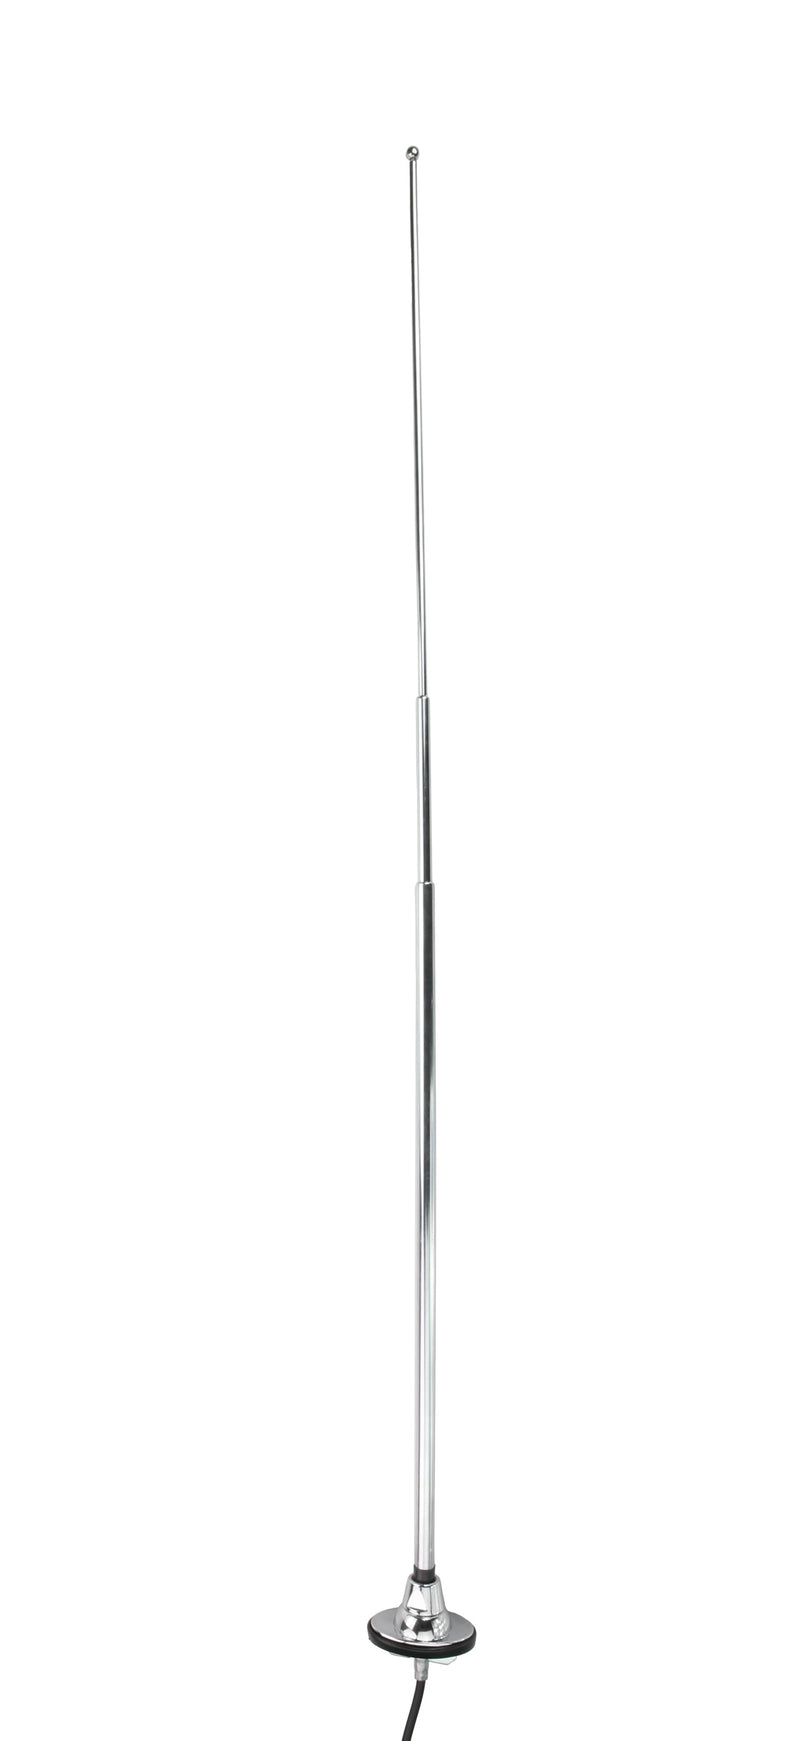 1986-92 Lincoln Mark VII Replacement Antenna